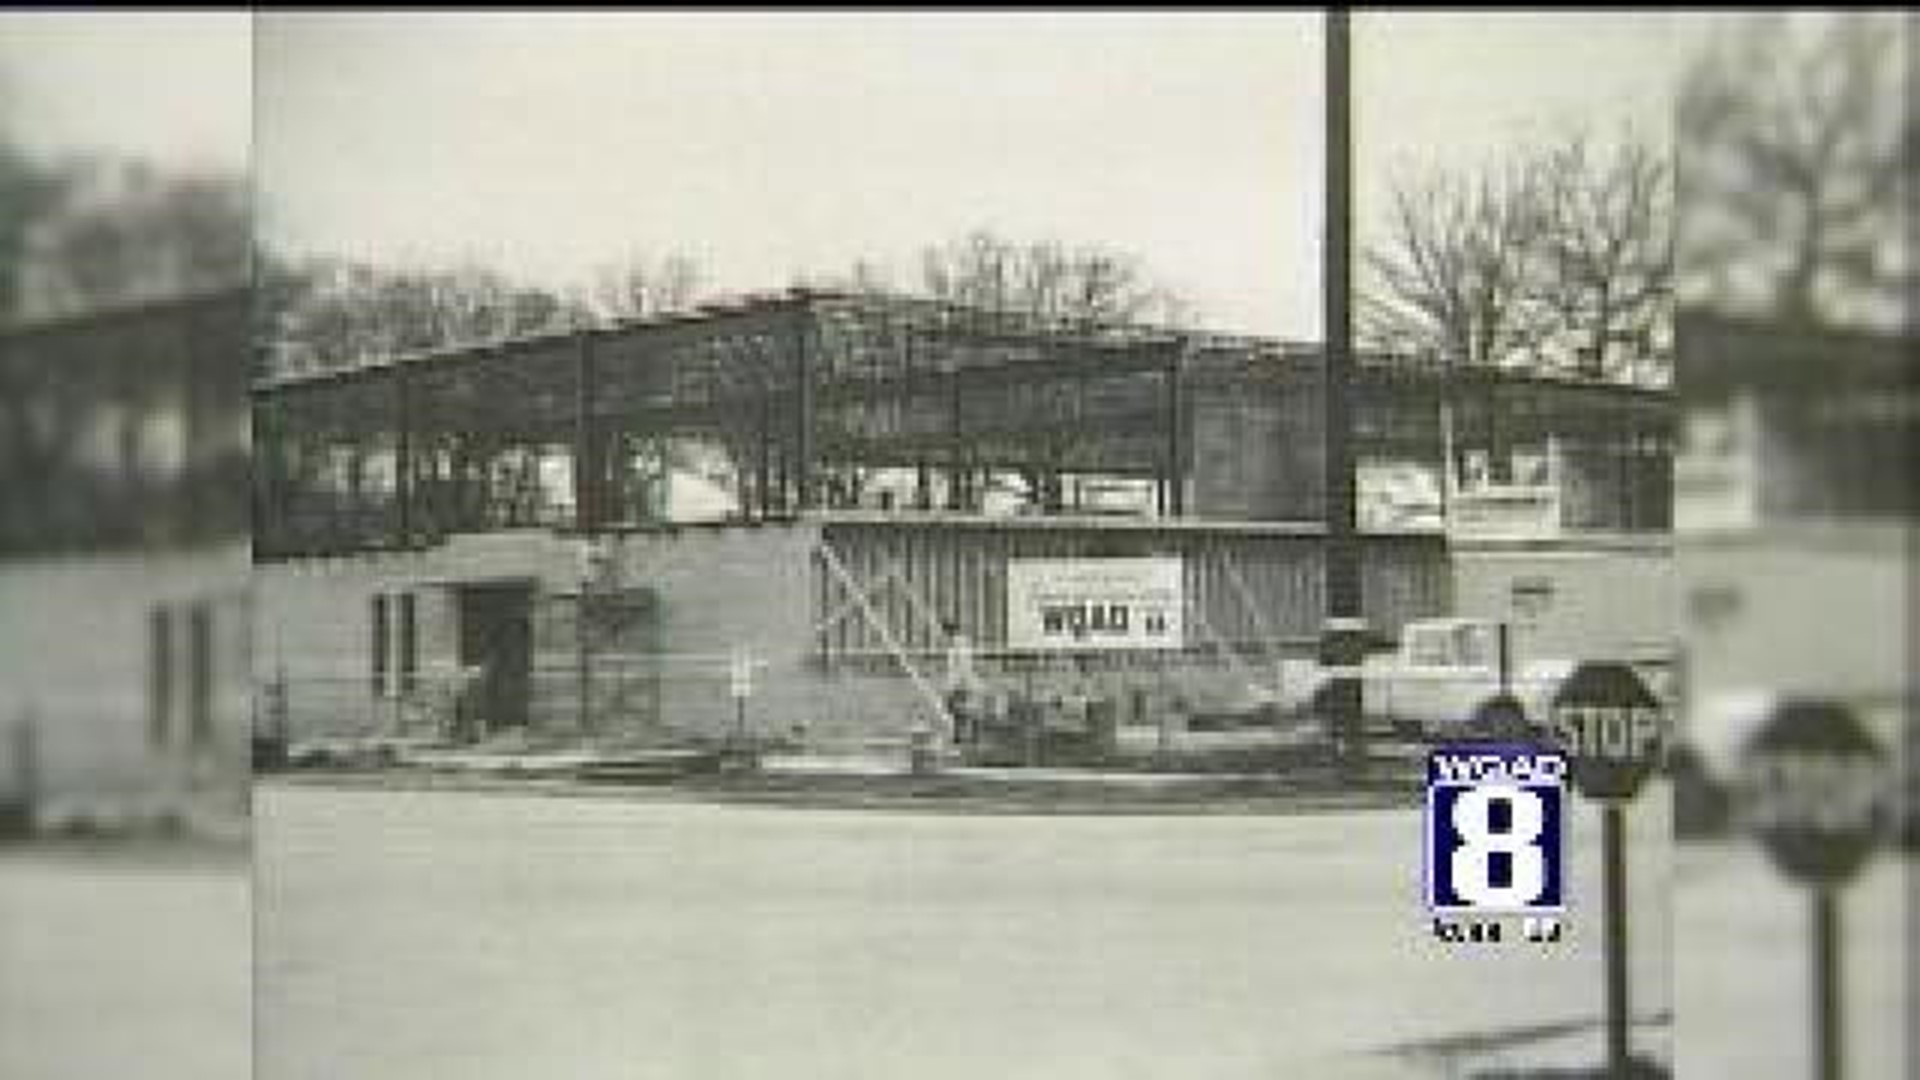 WQAD Anniversary: Getting On The Air